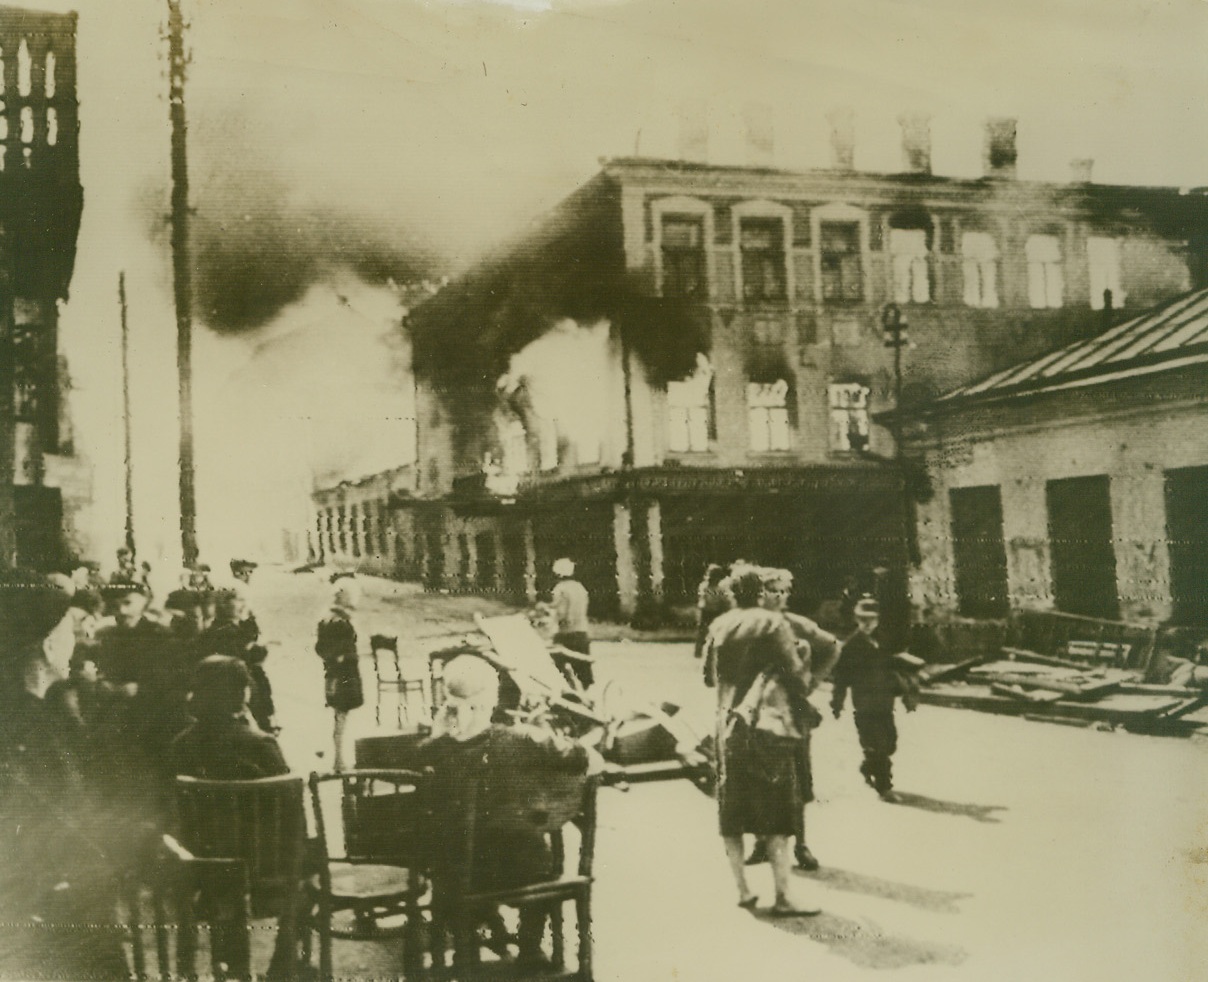 LIBERATED MINSK BURNS, 7/6/1944. MINSK—Residents of Minsk sit on salvaged furniture to watch homes, burned by the Nazis, go up in flames. Liberated by the rampaging Red Army, this former Nazi stronghold opens the gates on the road to Warsaw.Credit: Acme radiophoto;